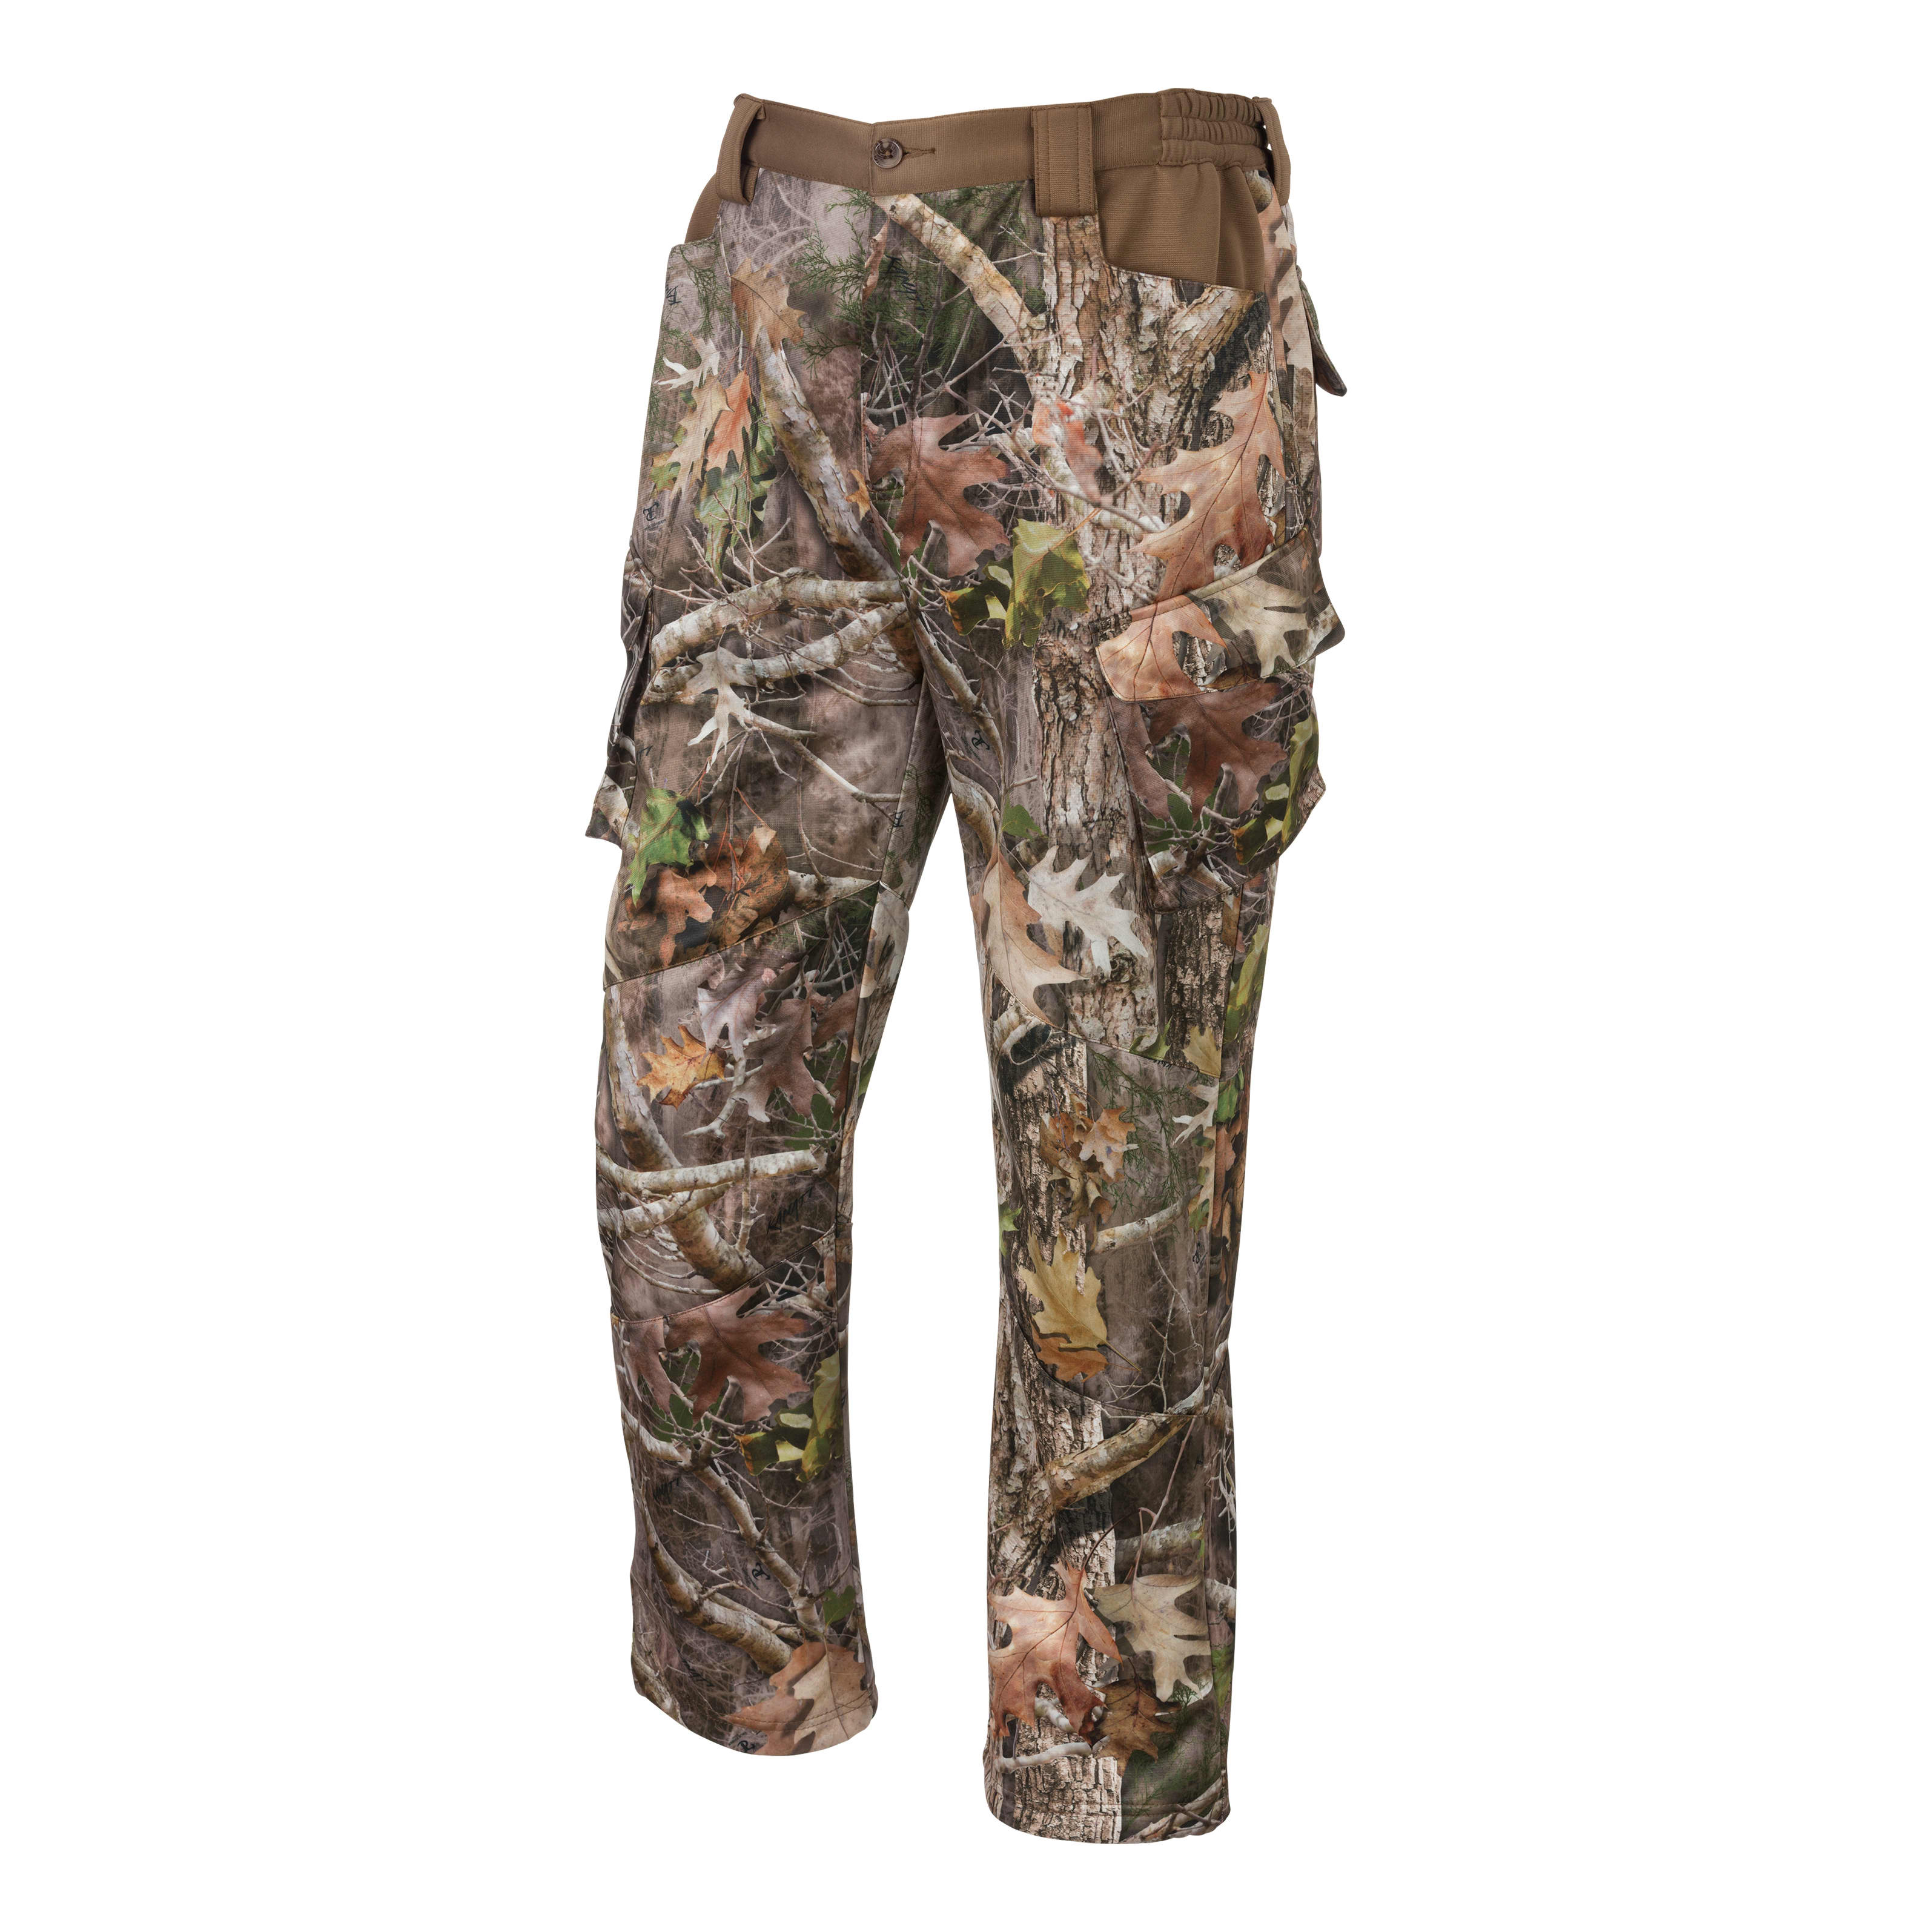 Mossy Oak® Mountain Country™ Men’s Relaxed Fit Camo Cargo Pant, Large